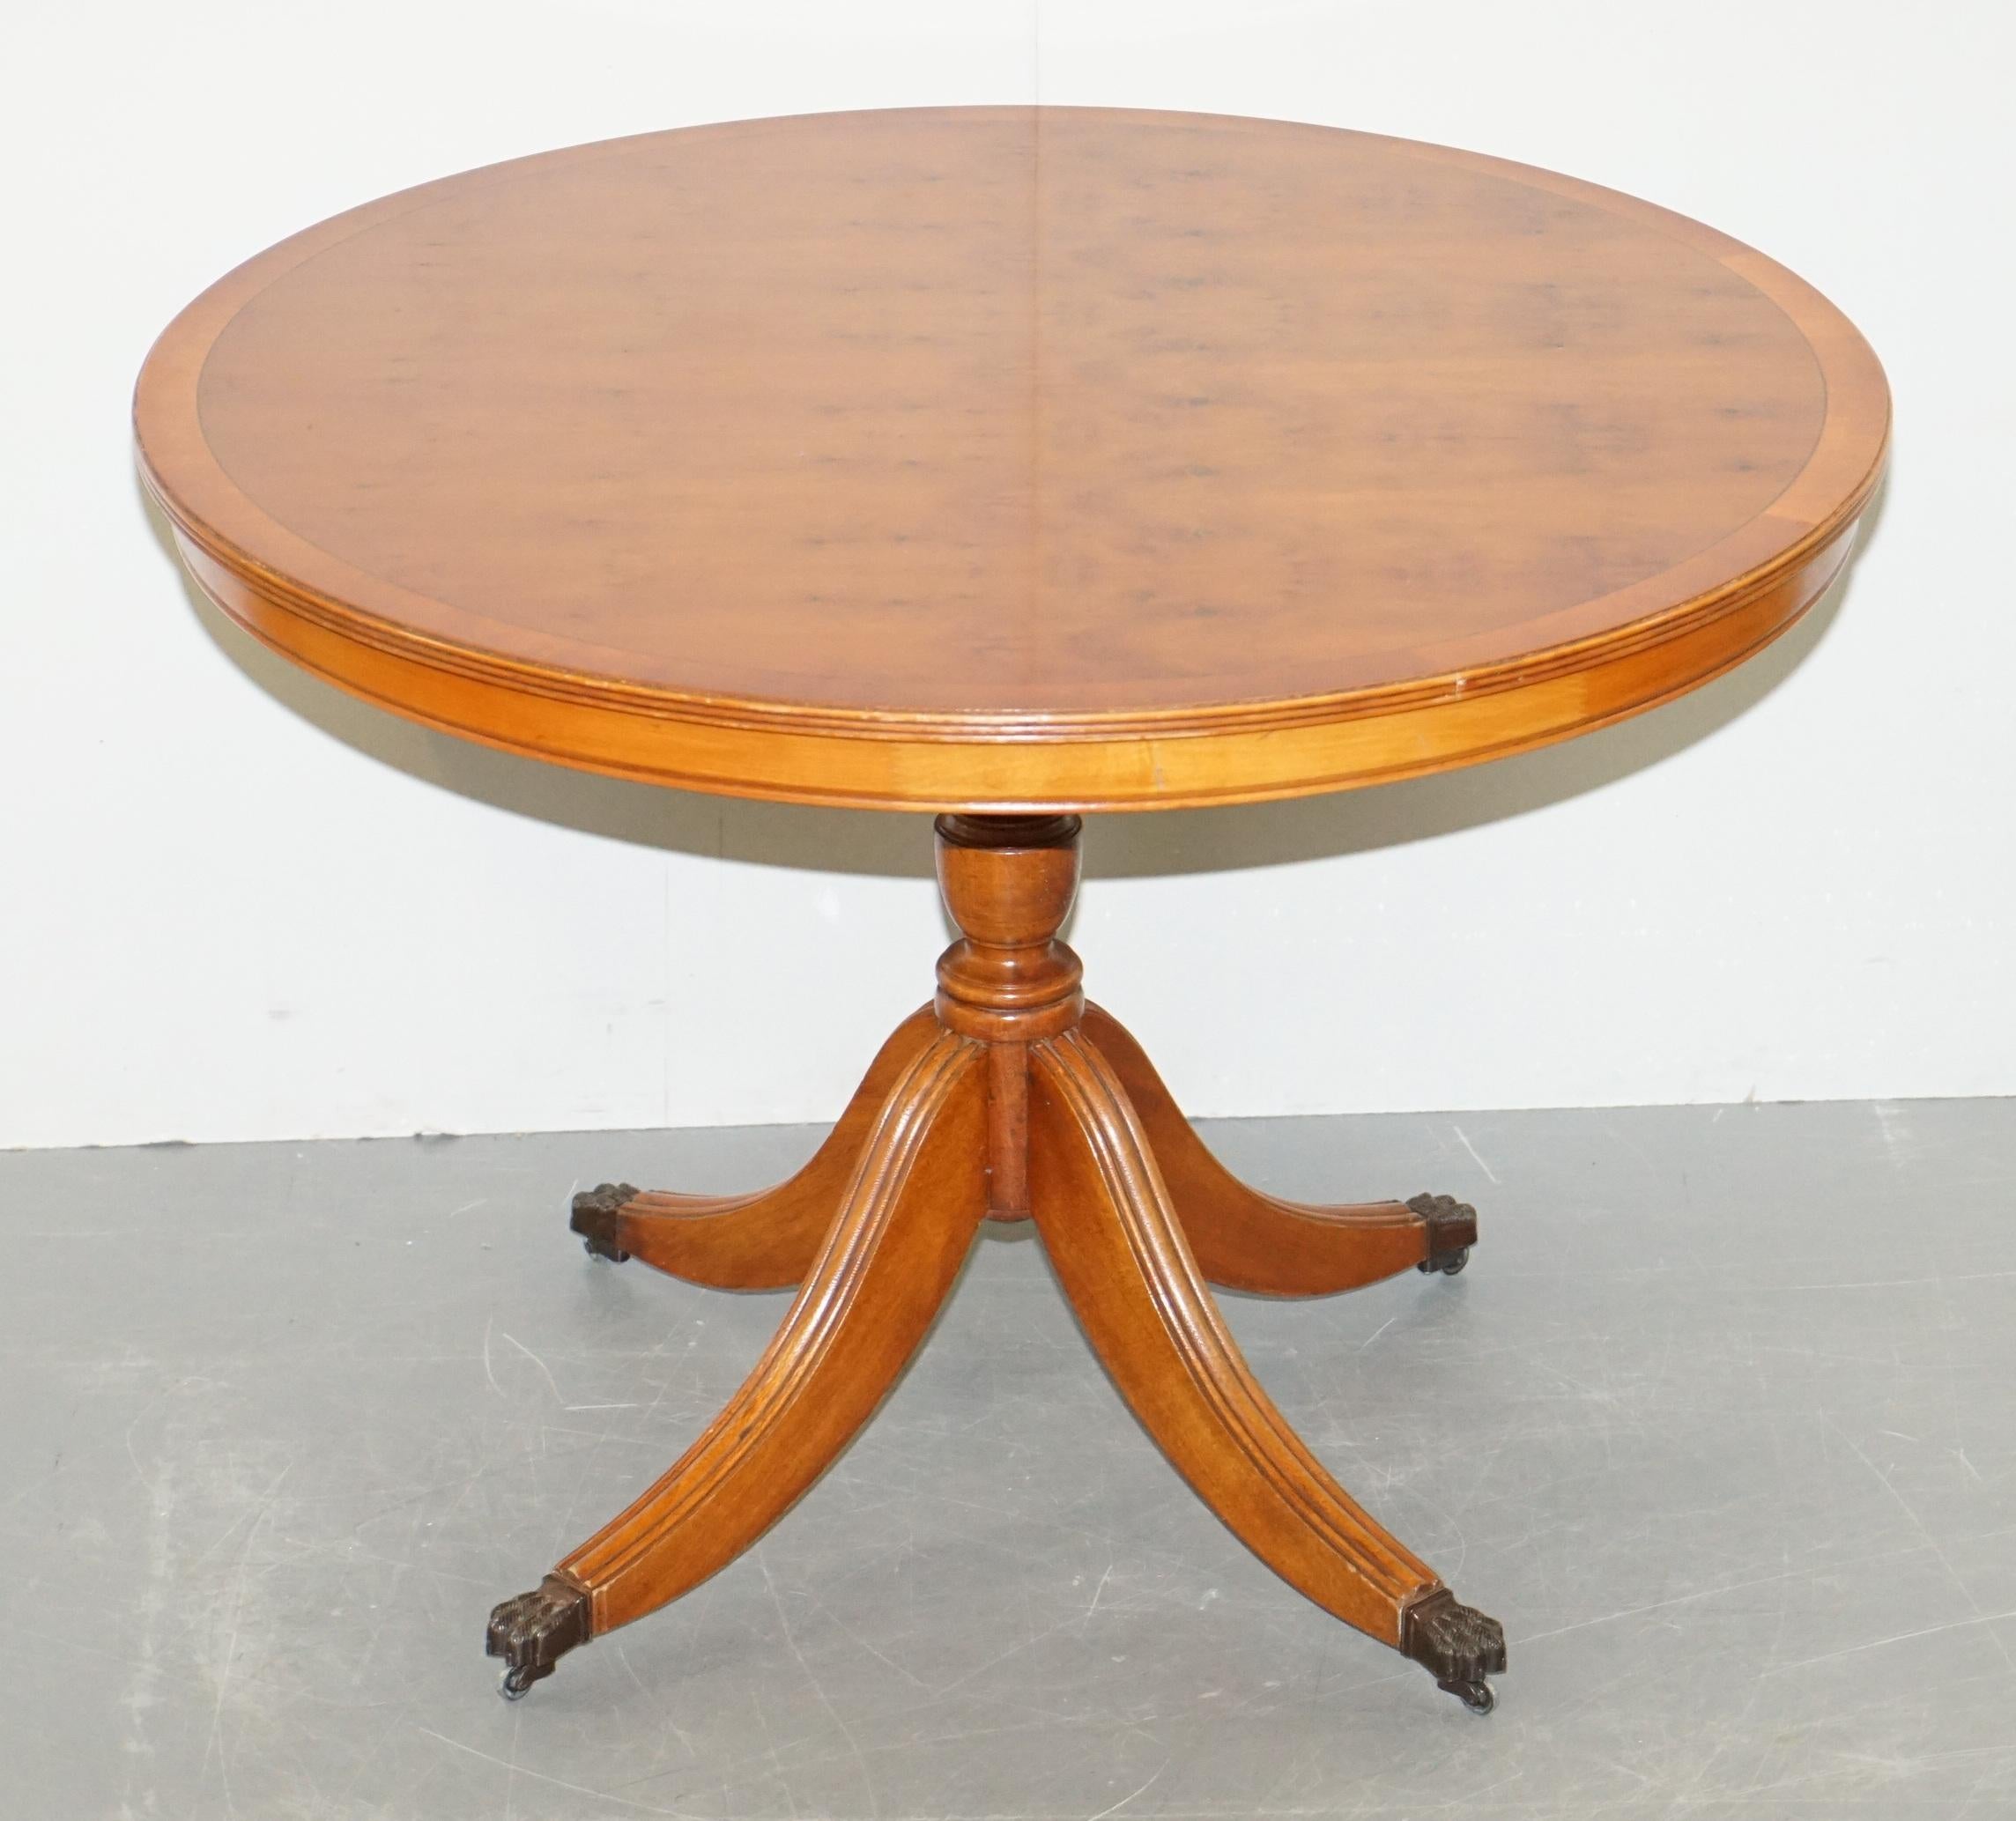 We are delighted to offer for sale this lovely handmade Burr Yew tilt-top dining or occasional centre table.

A good looking and well made piece> size wise it can be used as a four person dining table or as a centre table to be placed in the